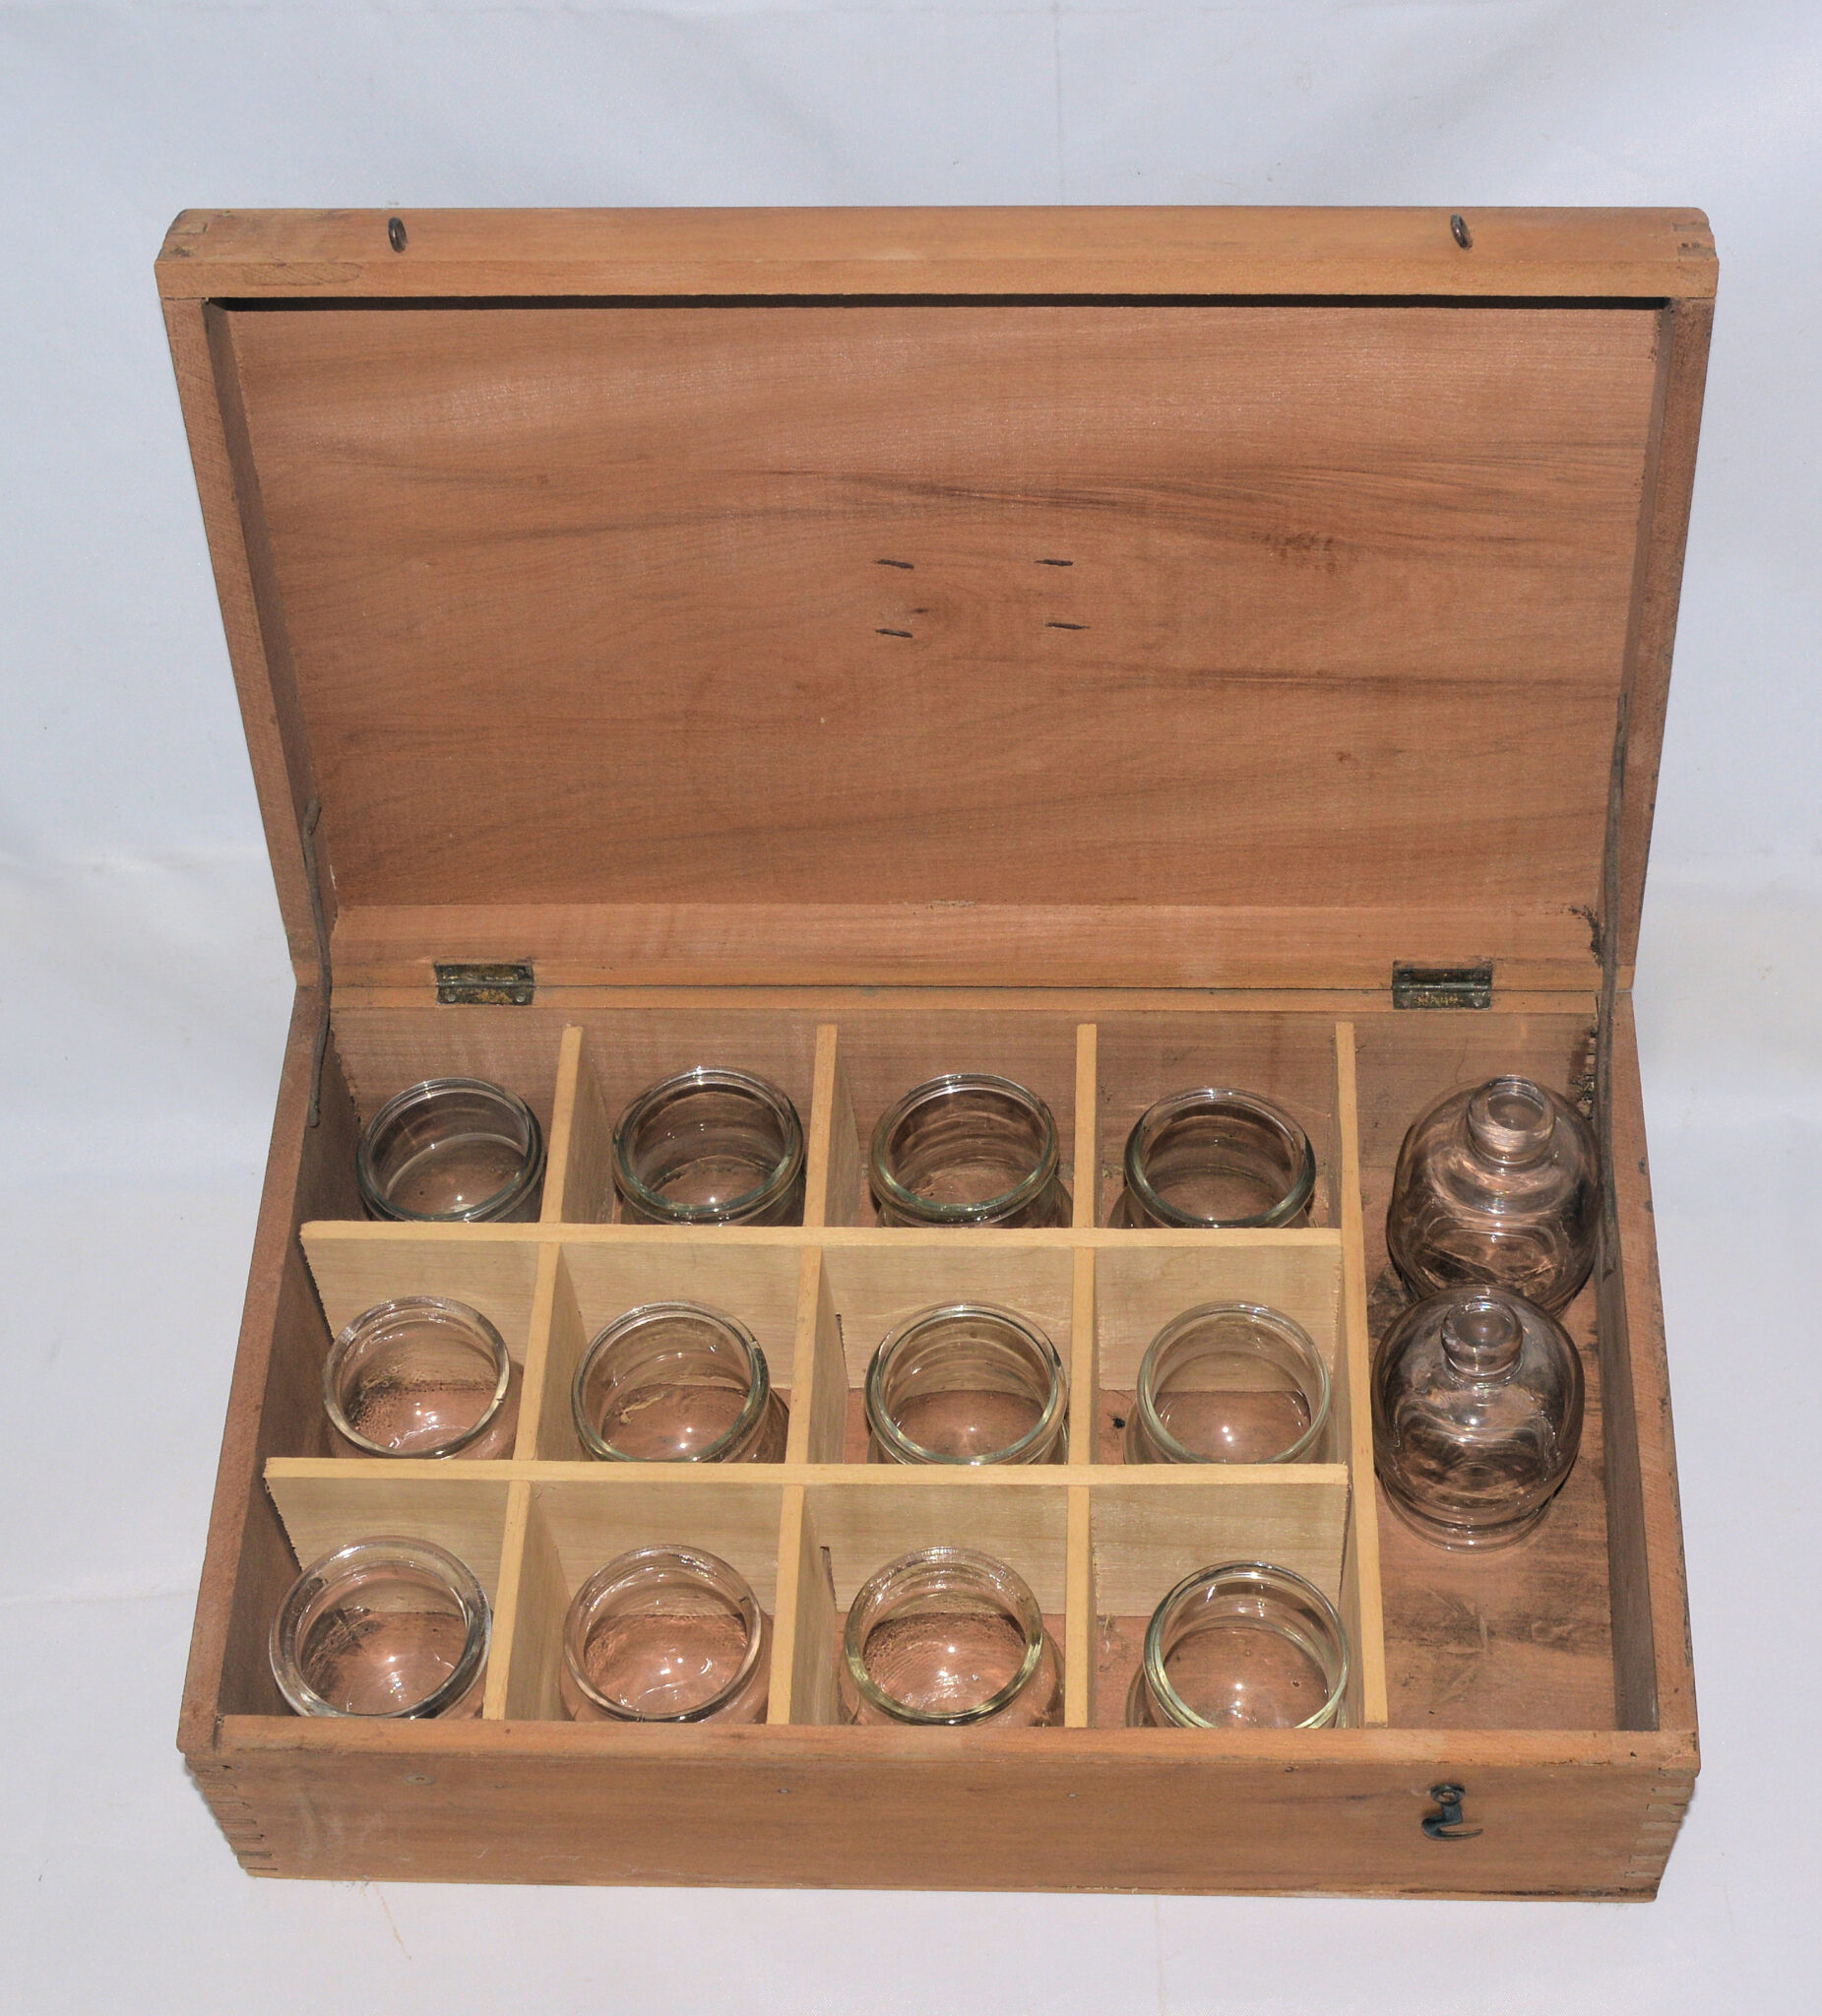 Blood cupping glasses in case.